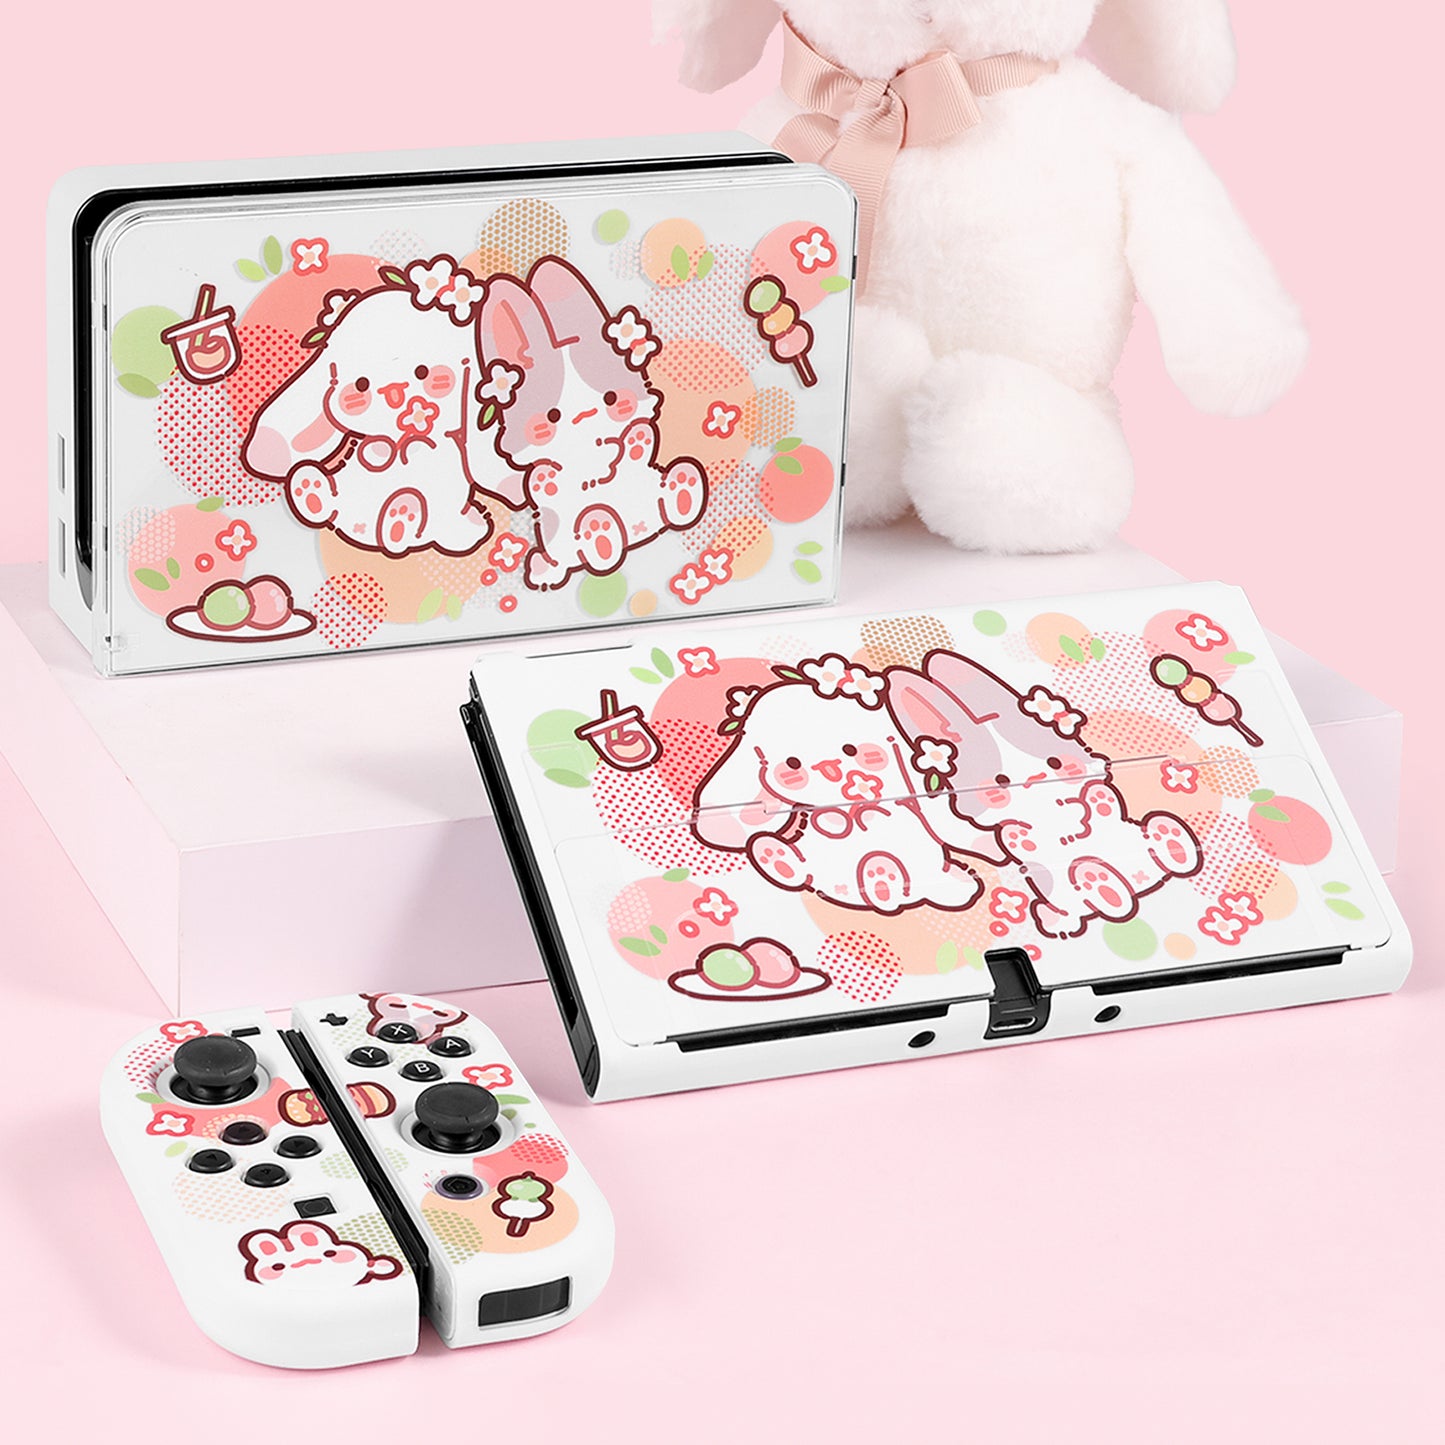 Switch OLED Case - Blossom Bunnies